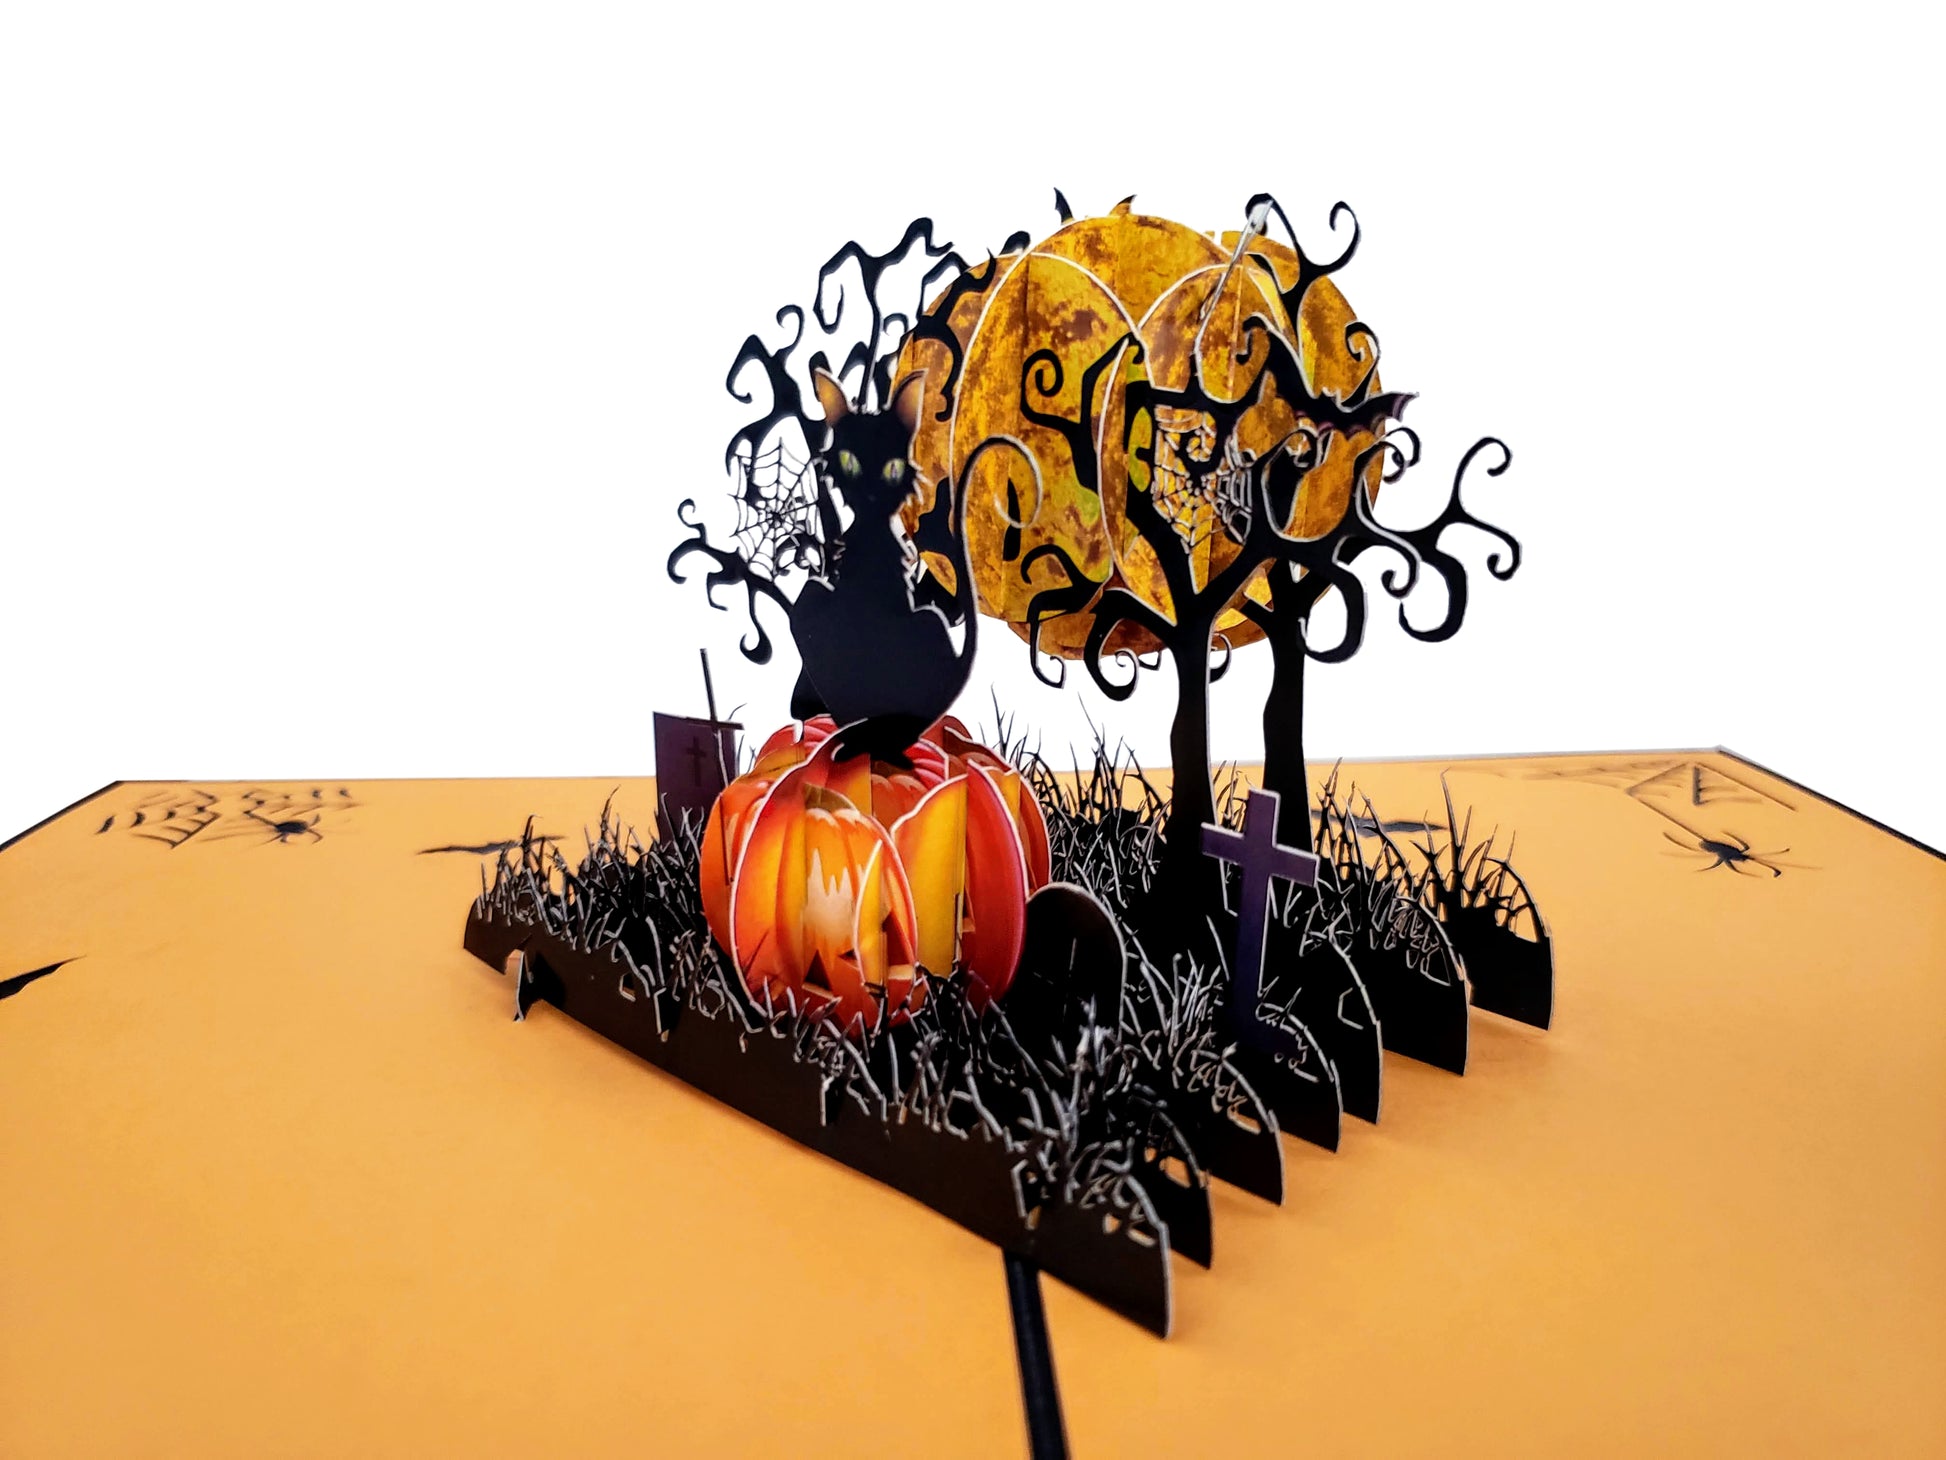 Scary Black Cat on Pumpkin Halloween 3D Pop Up Greeting Card - 3d halloween card - best deal - Best - iGifts And Cards